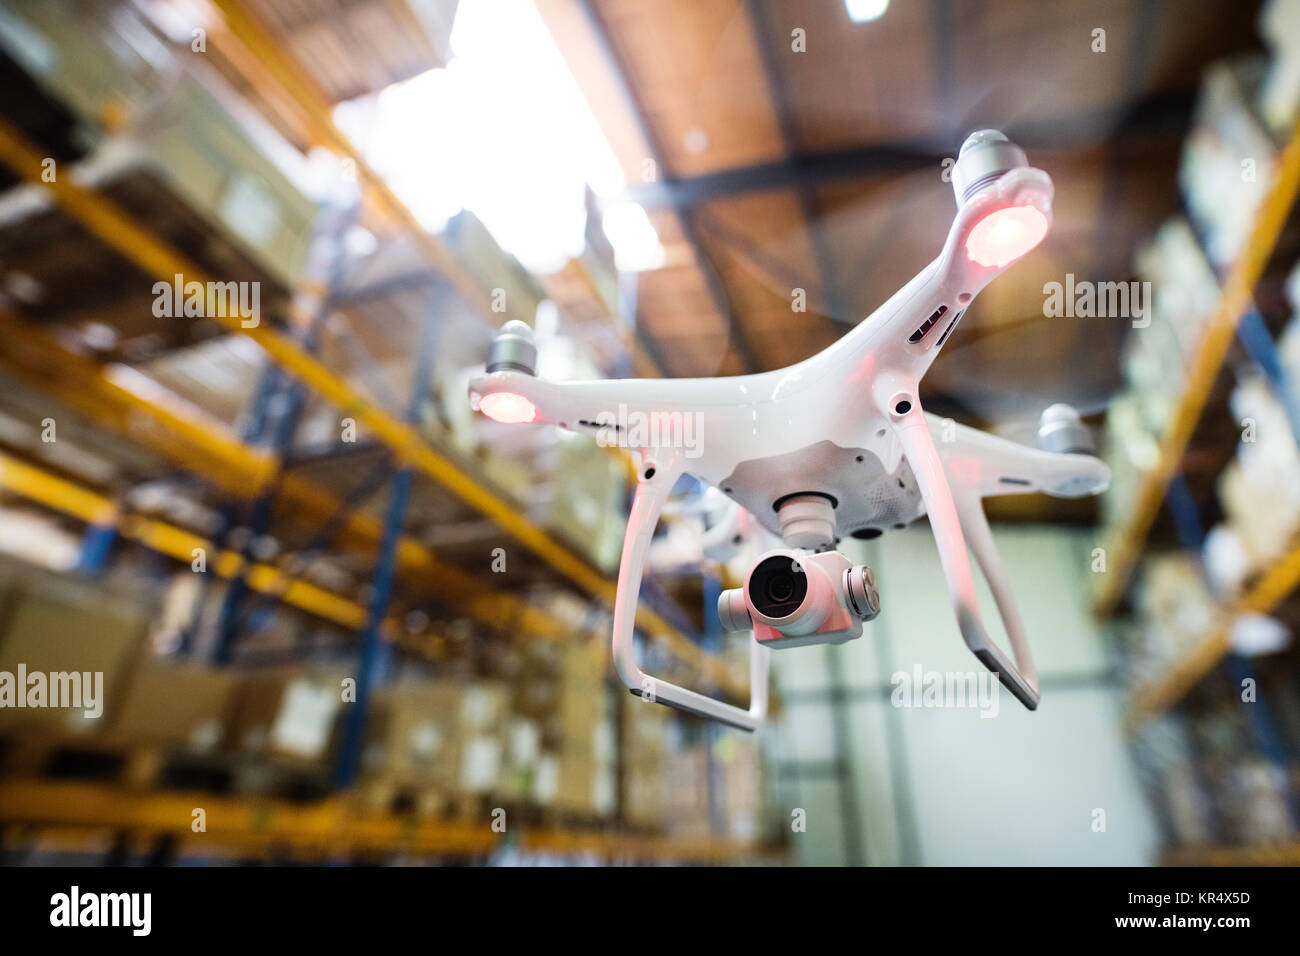 White drone flying inside the warehouse. Stock Photo